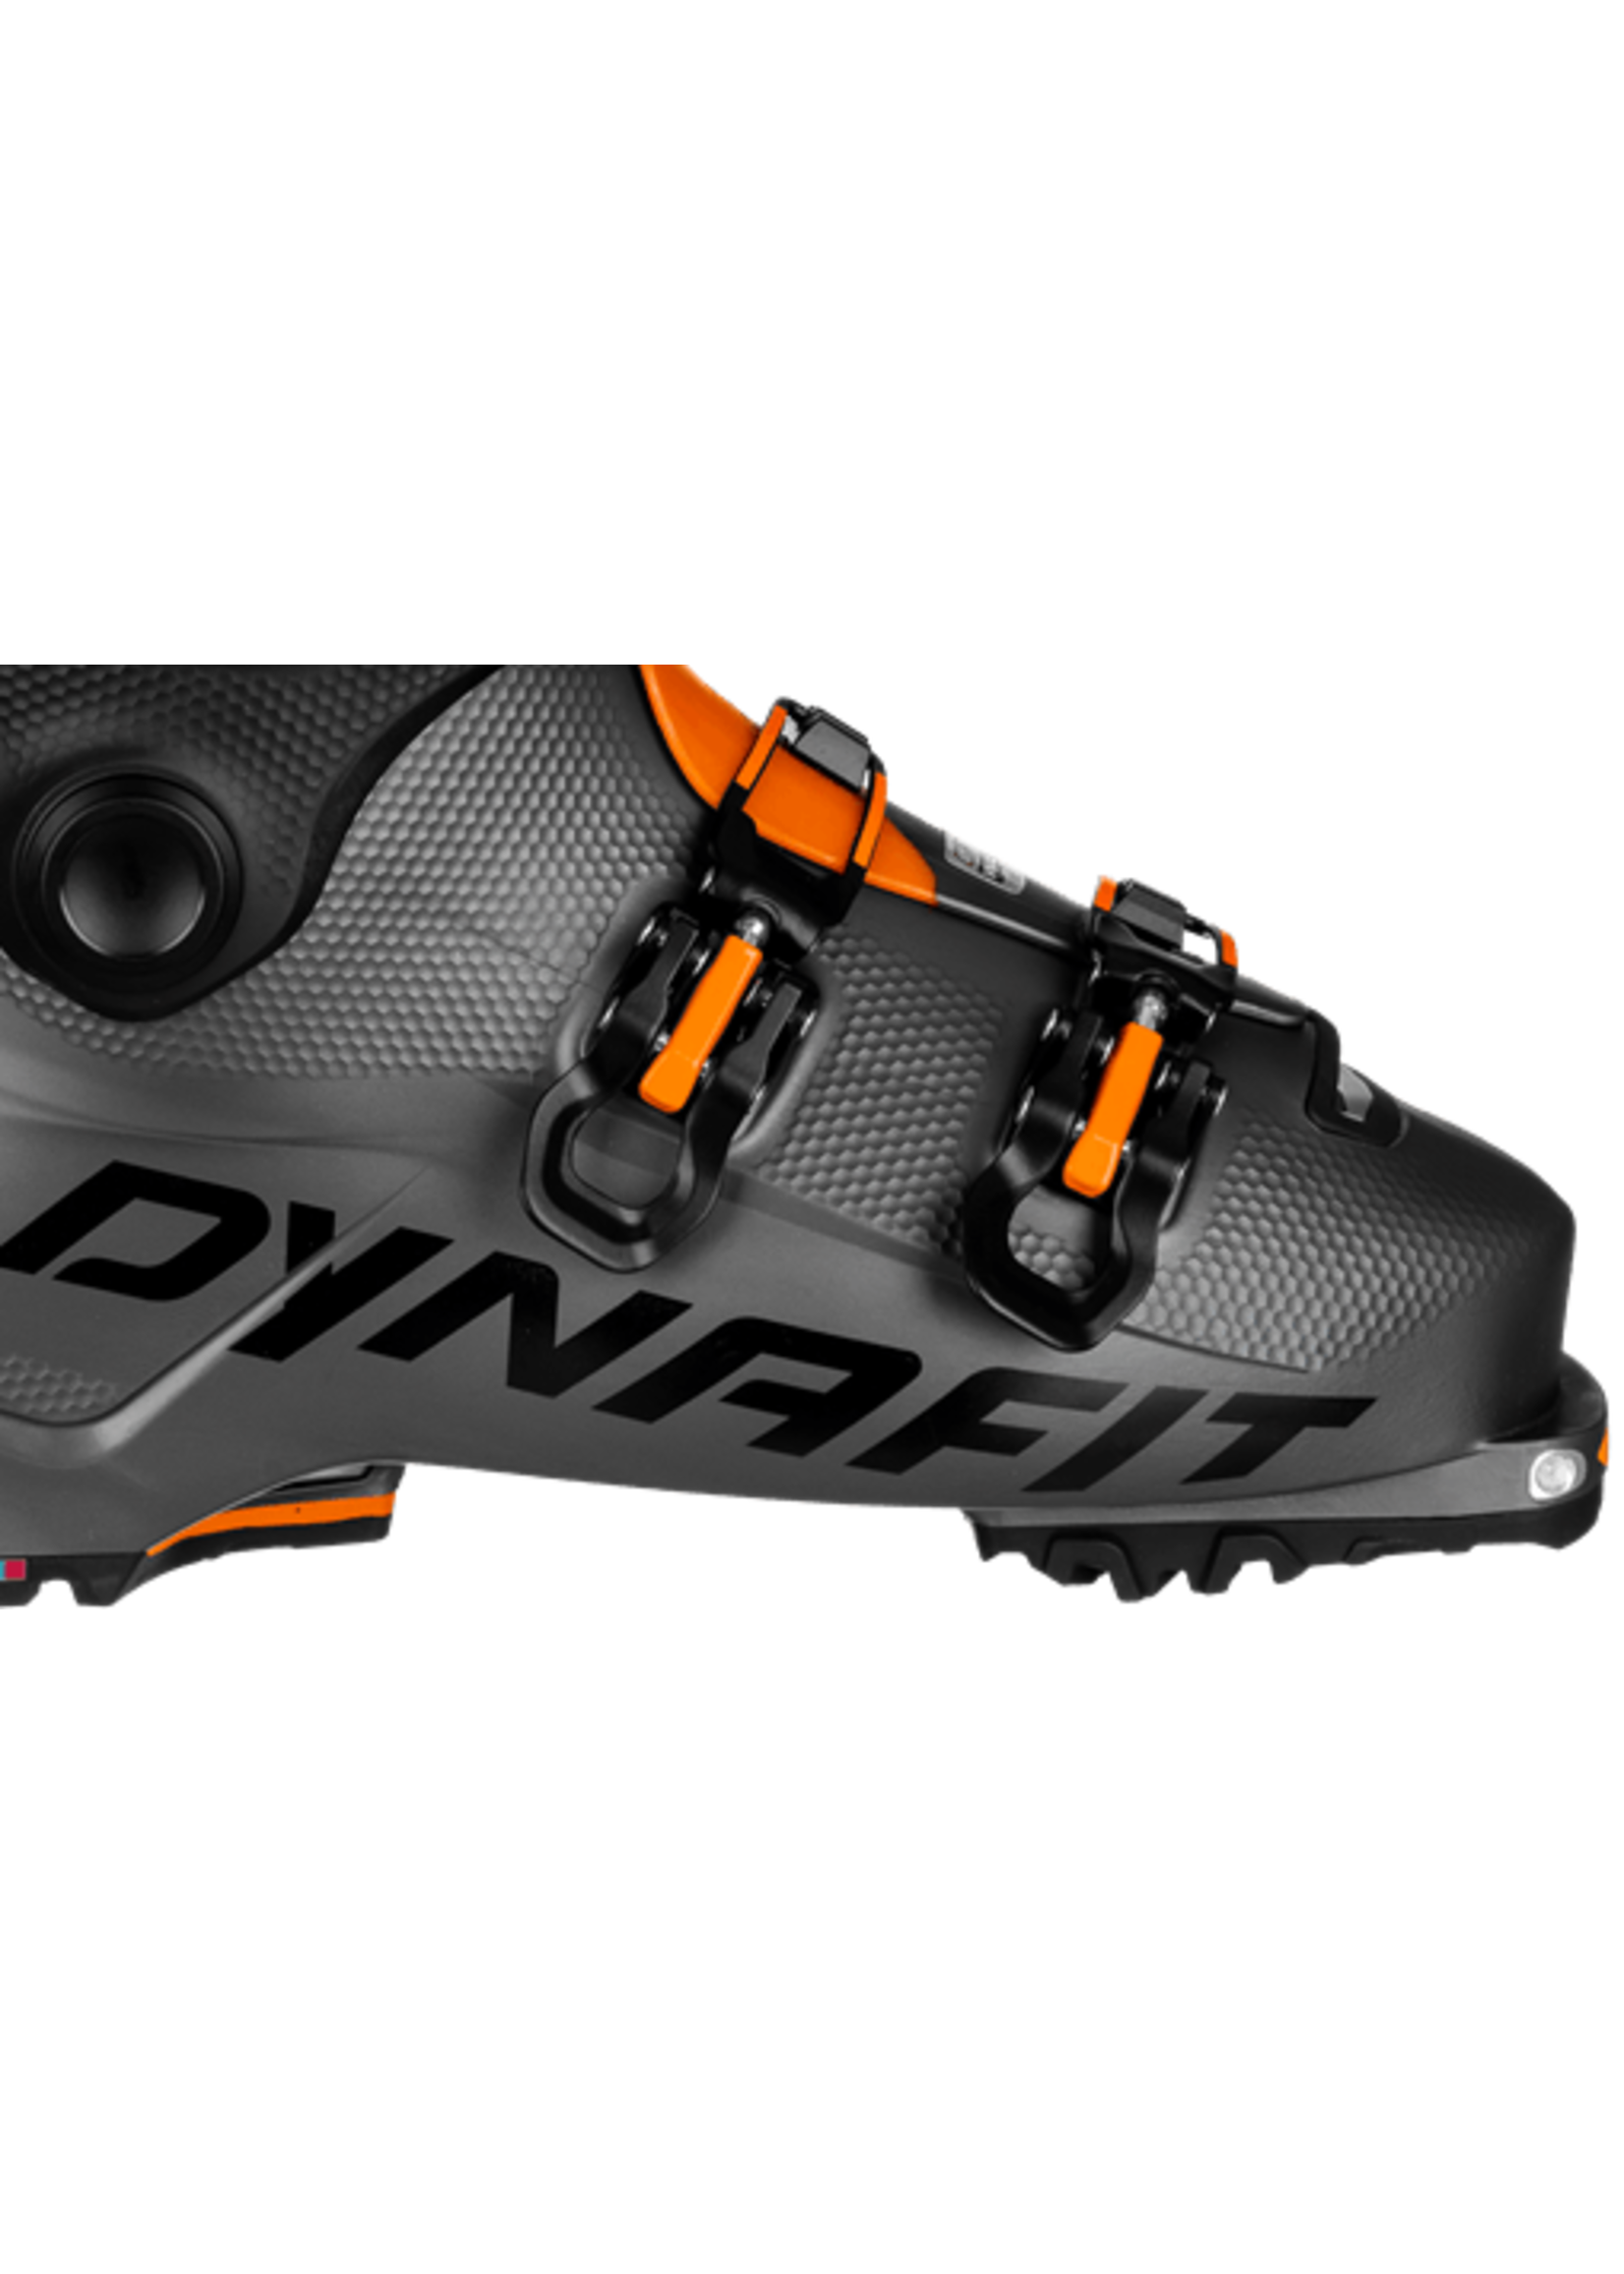 Dynafit Touring Boot Tigard 110